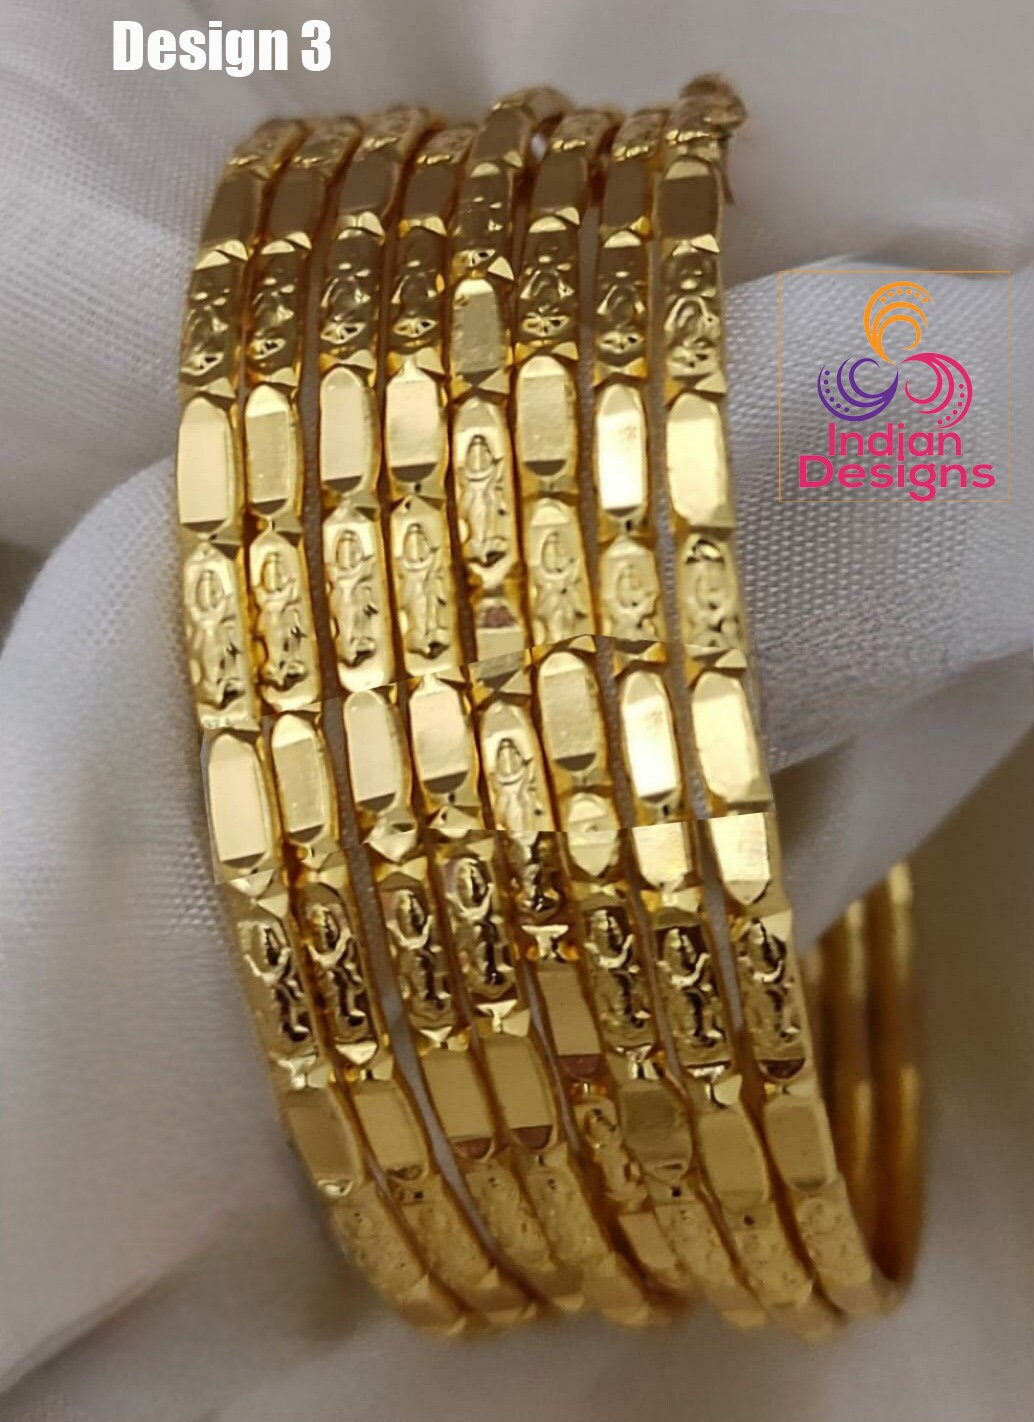 1 gram Gold-Plated Daily wear Bangle Bracelets set of 8|Traditional Indian Jewelry Wedding bangle set|Bollywood Ethnic Bangles Gift for her